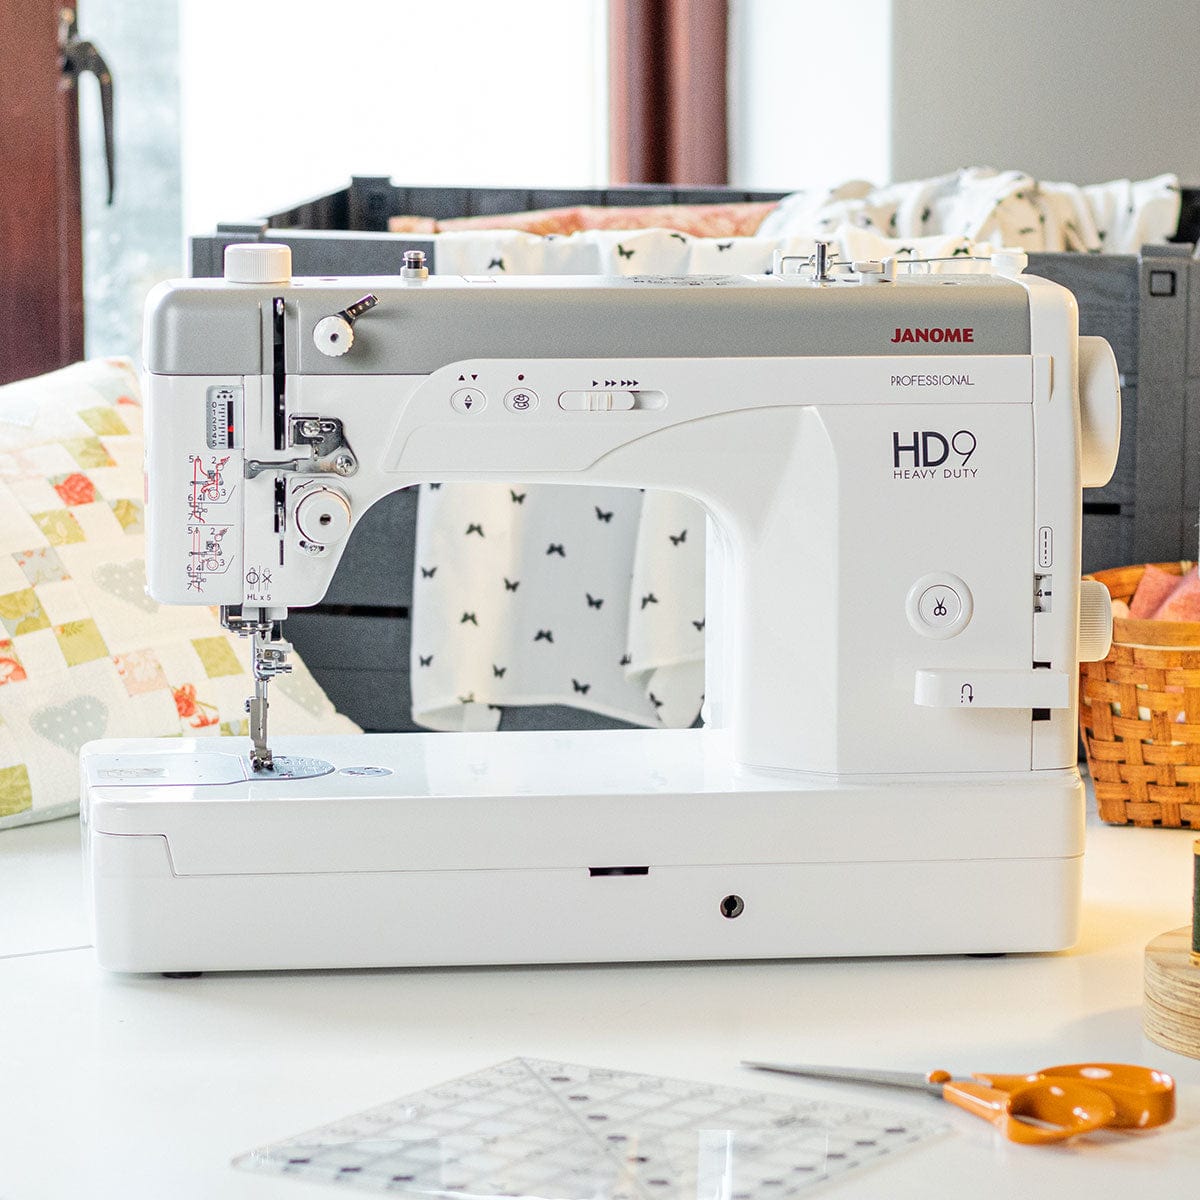 Sewing bags with the Janome HD9 Professional